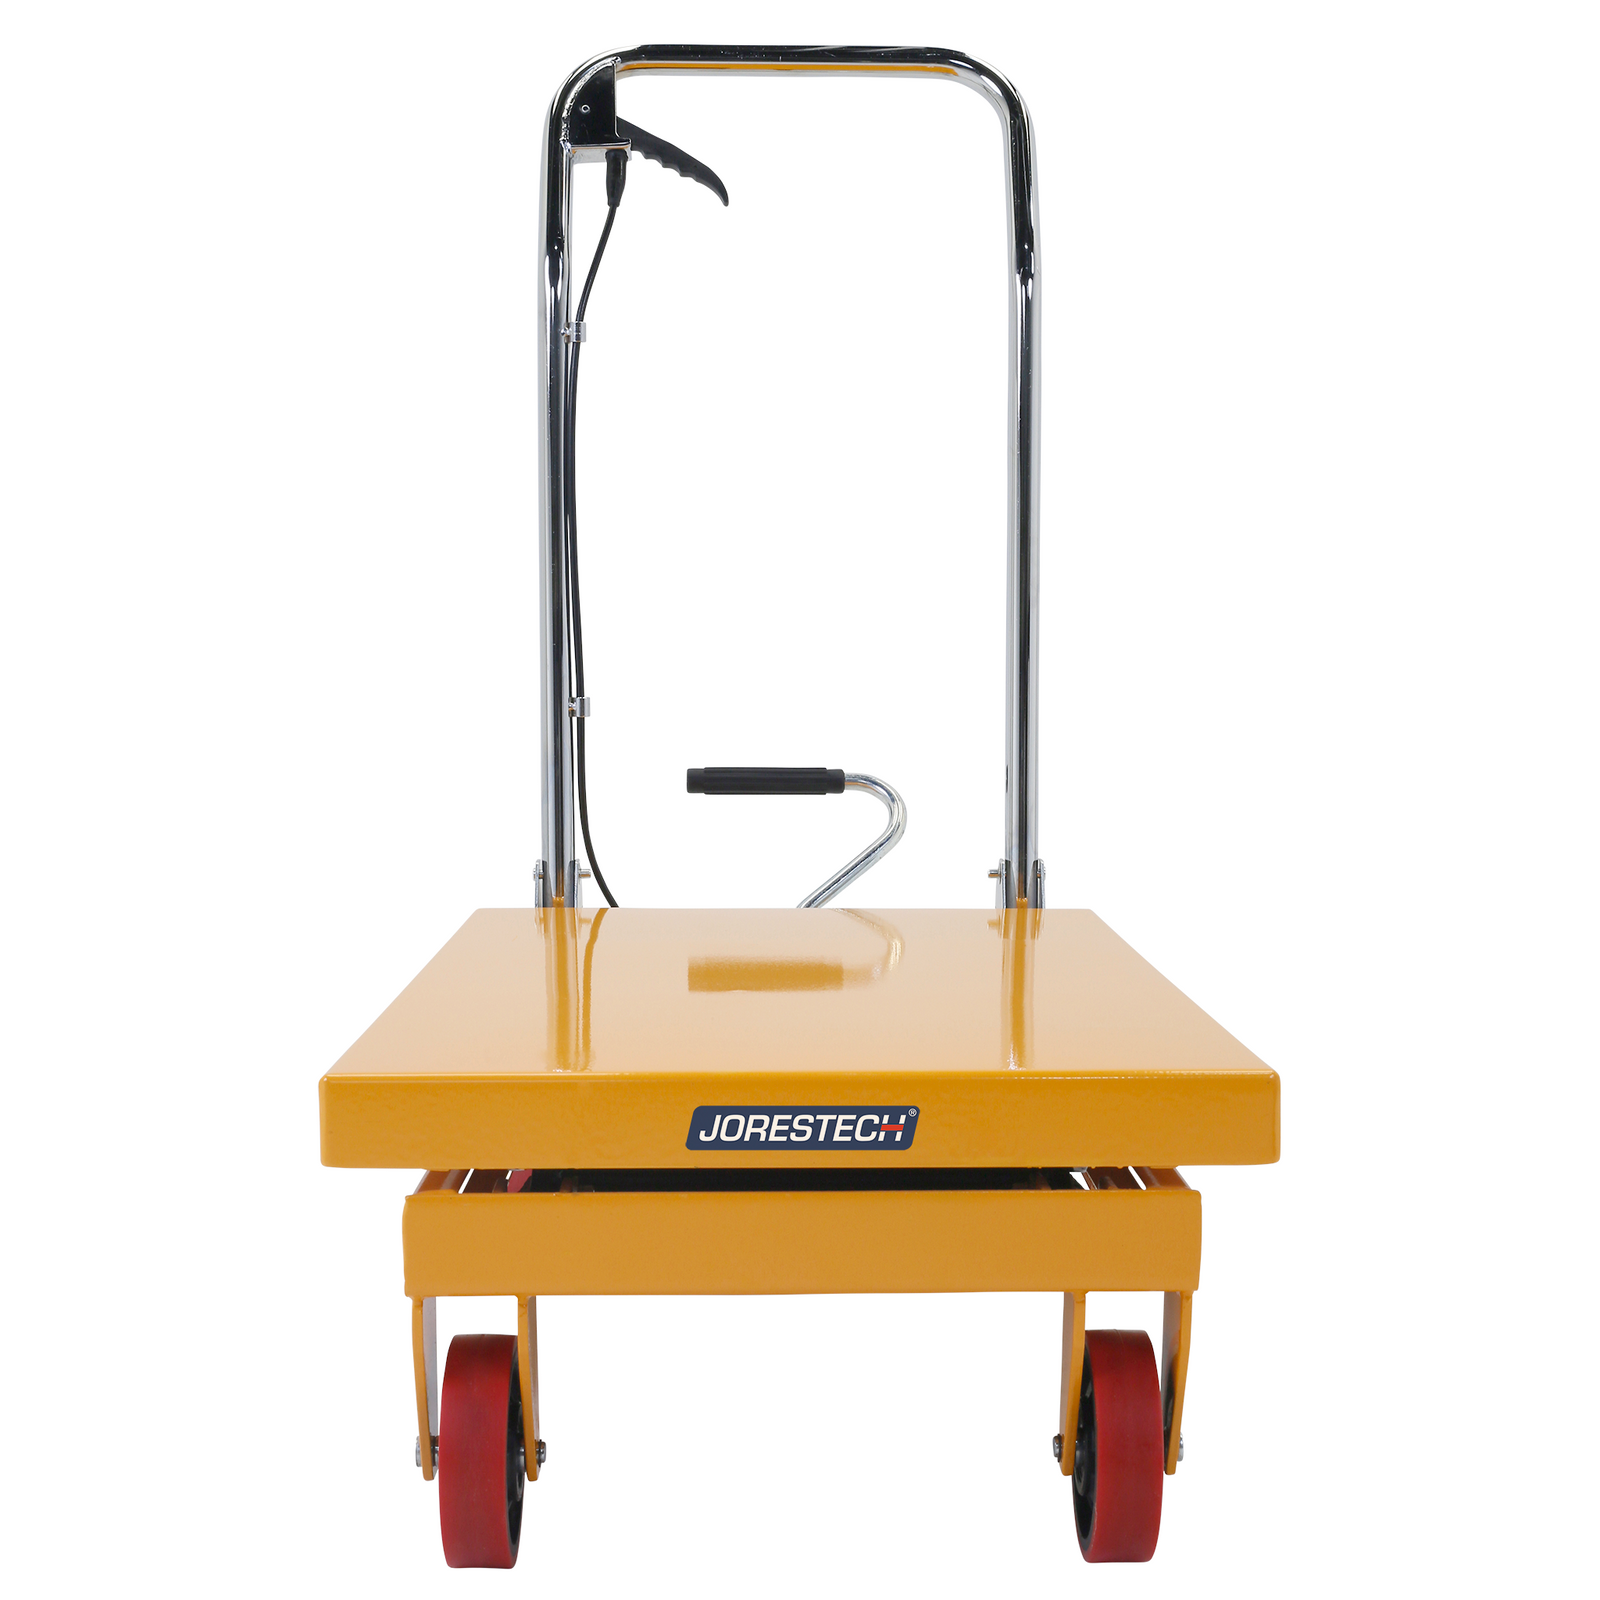 Front view of a JORESTECH black and yellow table lift for 500 Kg. The table is completely collapsed and it has noting on top.